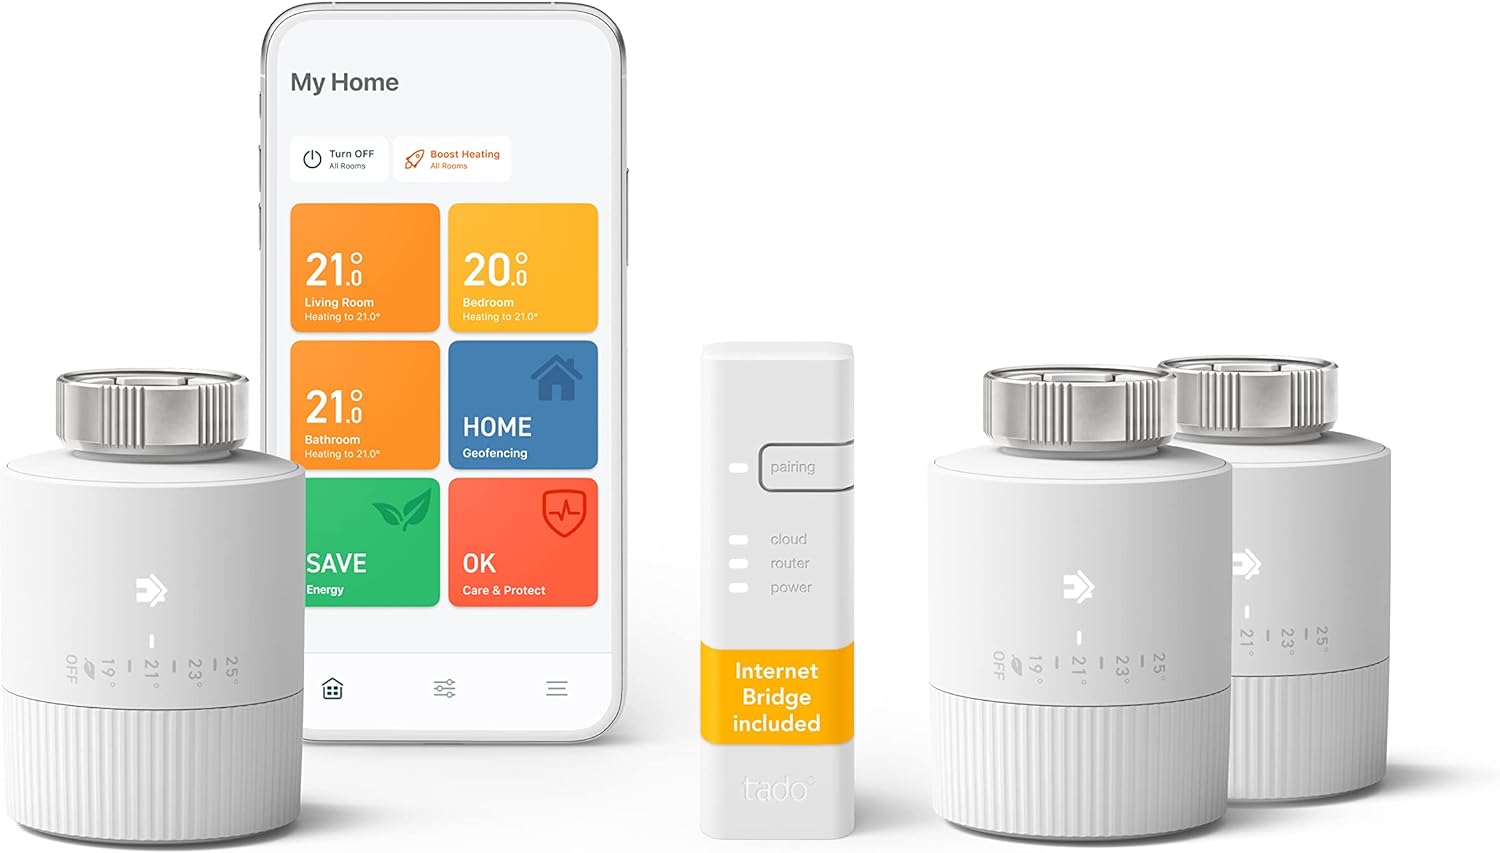 tado° Smart Radiator Thermostat - Wifi Add - On Smart Radiator Valve For Digital Multi - Room Control, Easy Installation, Save Heating Costs - Works With Alexa, Siri, And Google Assistant - Amazing Gadgets Outlet